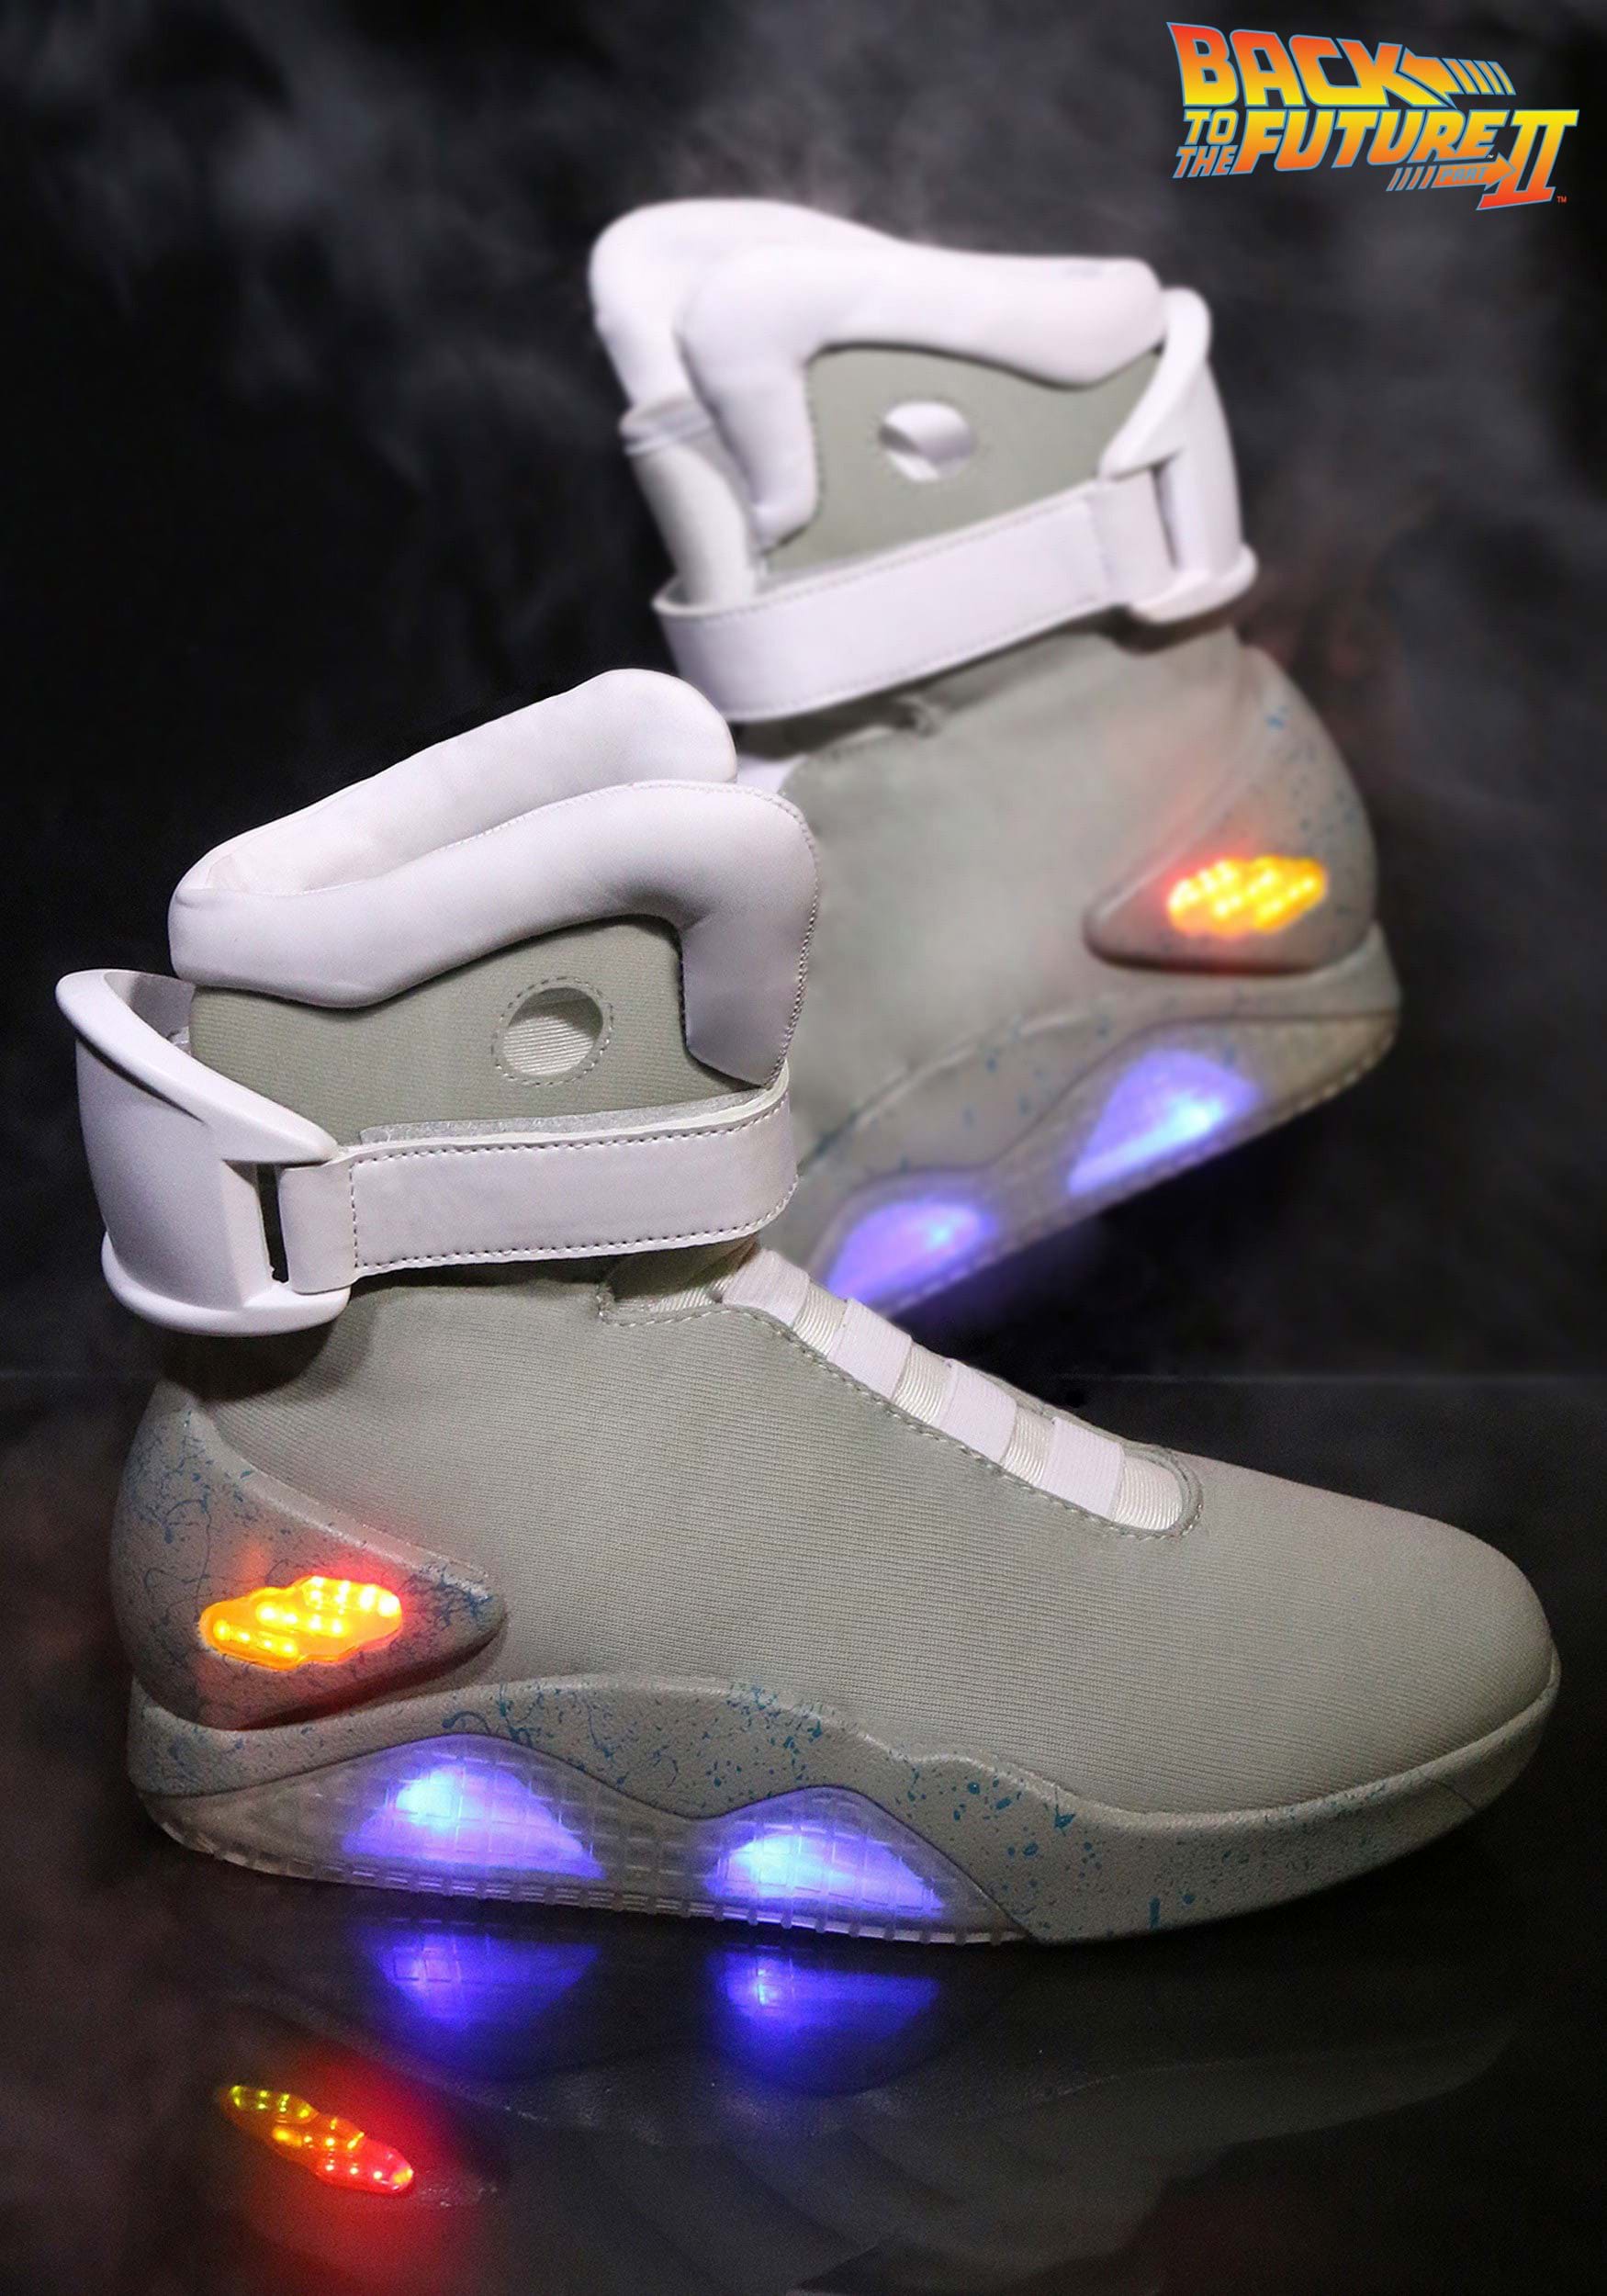 Nike Made Just 89 Pairs of the 'Back to the Future' High-top Sneakers |  WIRED